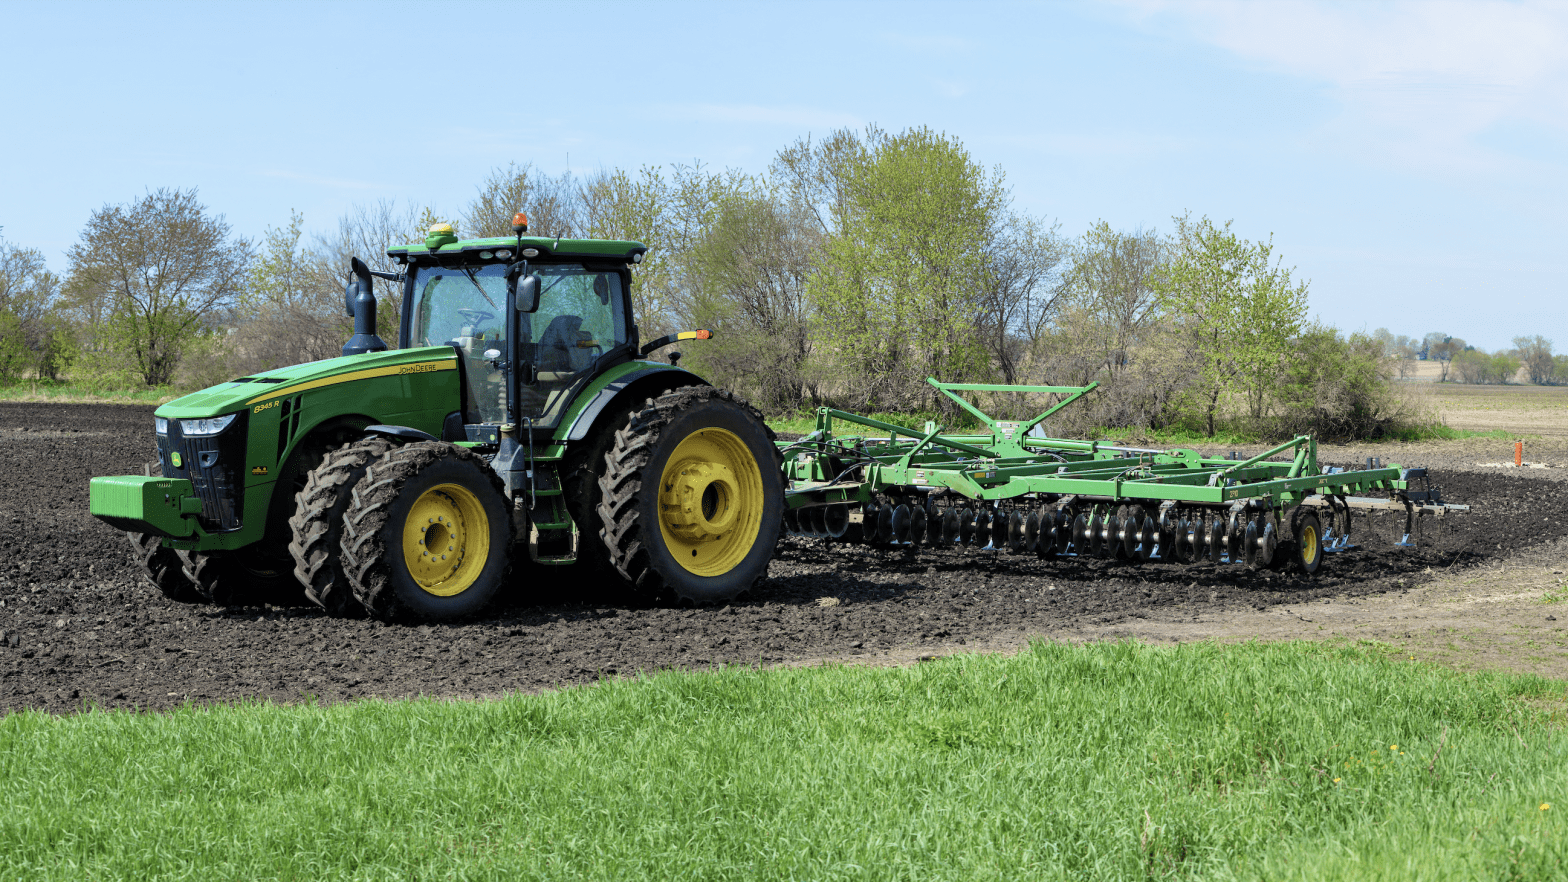 The right to repair agreement would apply to tractors, combines, tillage equipment, and some off-road vehicles used in agriculture.  (Image: dvande, Shutterstock)